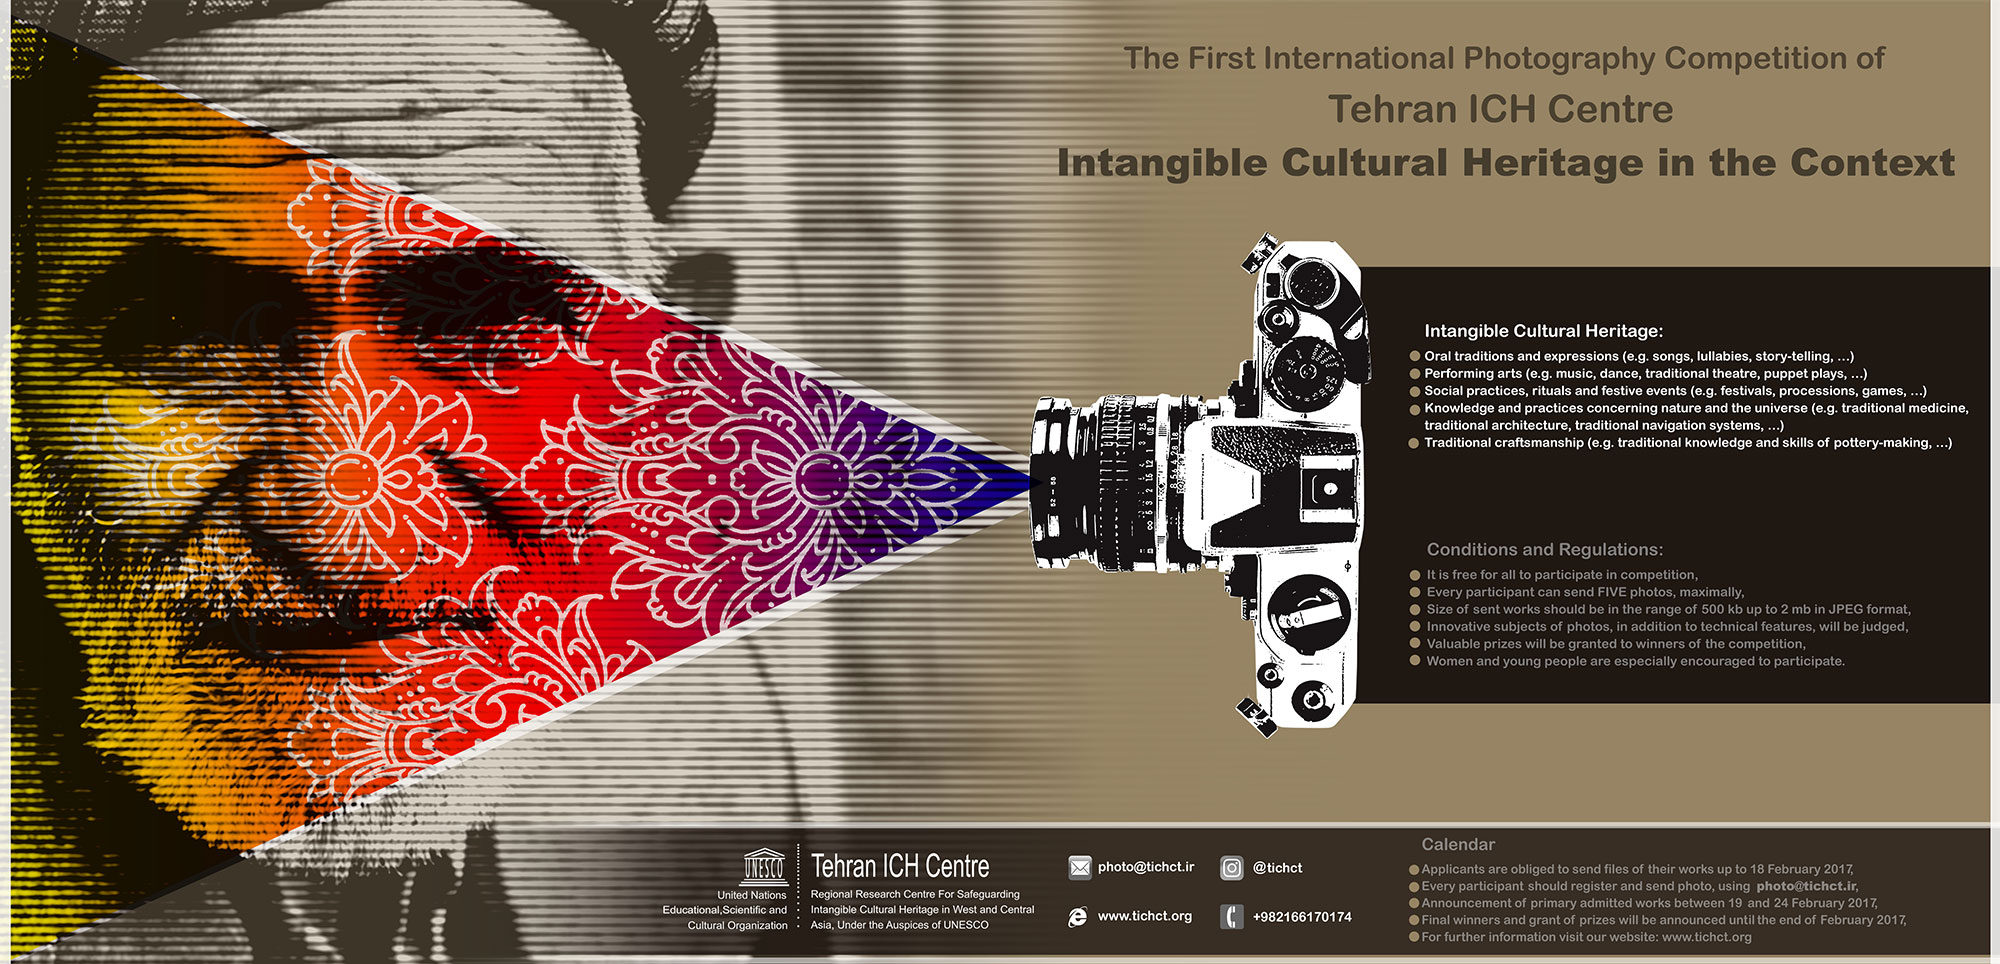 The First International Photography competition of Tehran ICH Centre Intangible Cultural Heritage in the Context